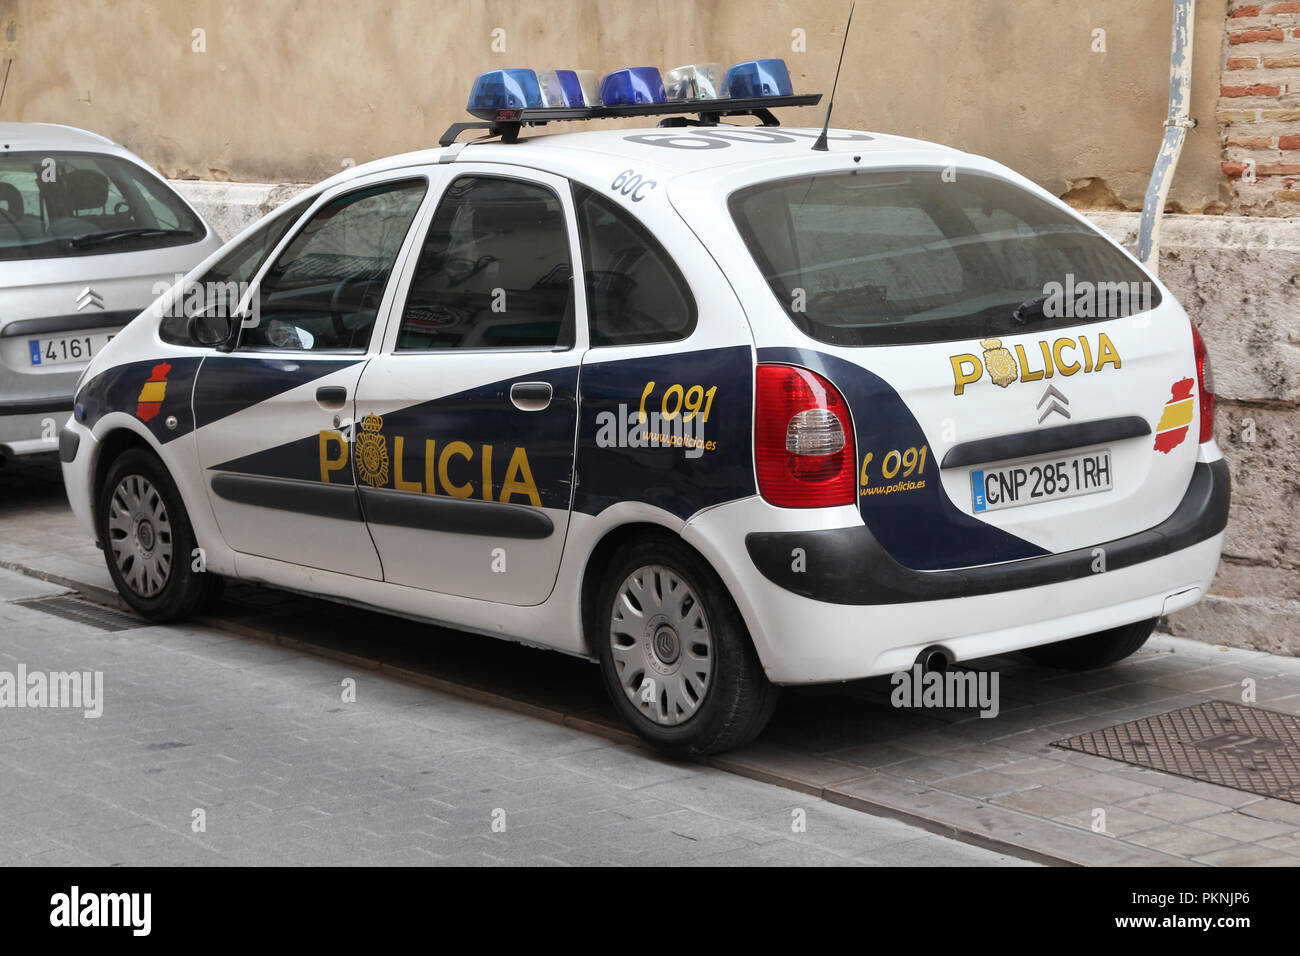 VALENCIA - OCTOBER 9: Citroen Xsara Picasso of Valencia Police on October 9, 2010 in Valencia, Spain. Citroen Xsara Picasso has been one of C's most s Stock Photo